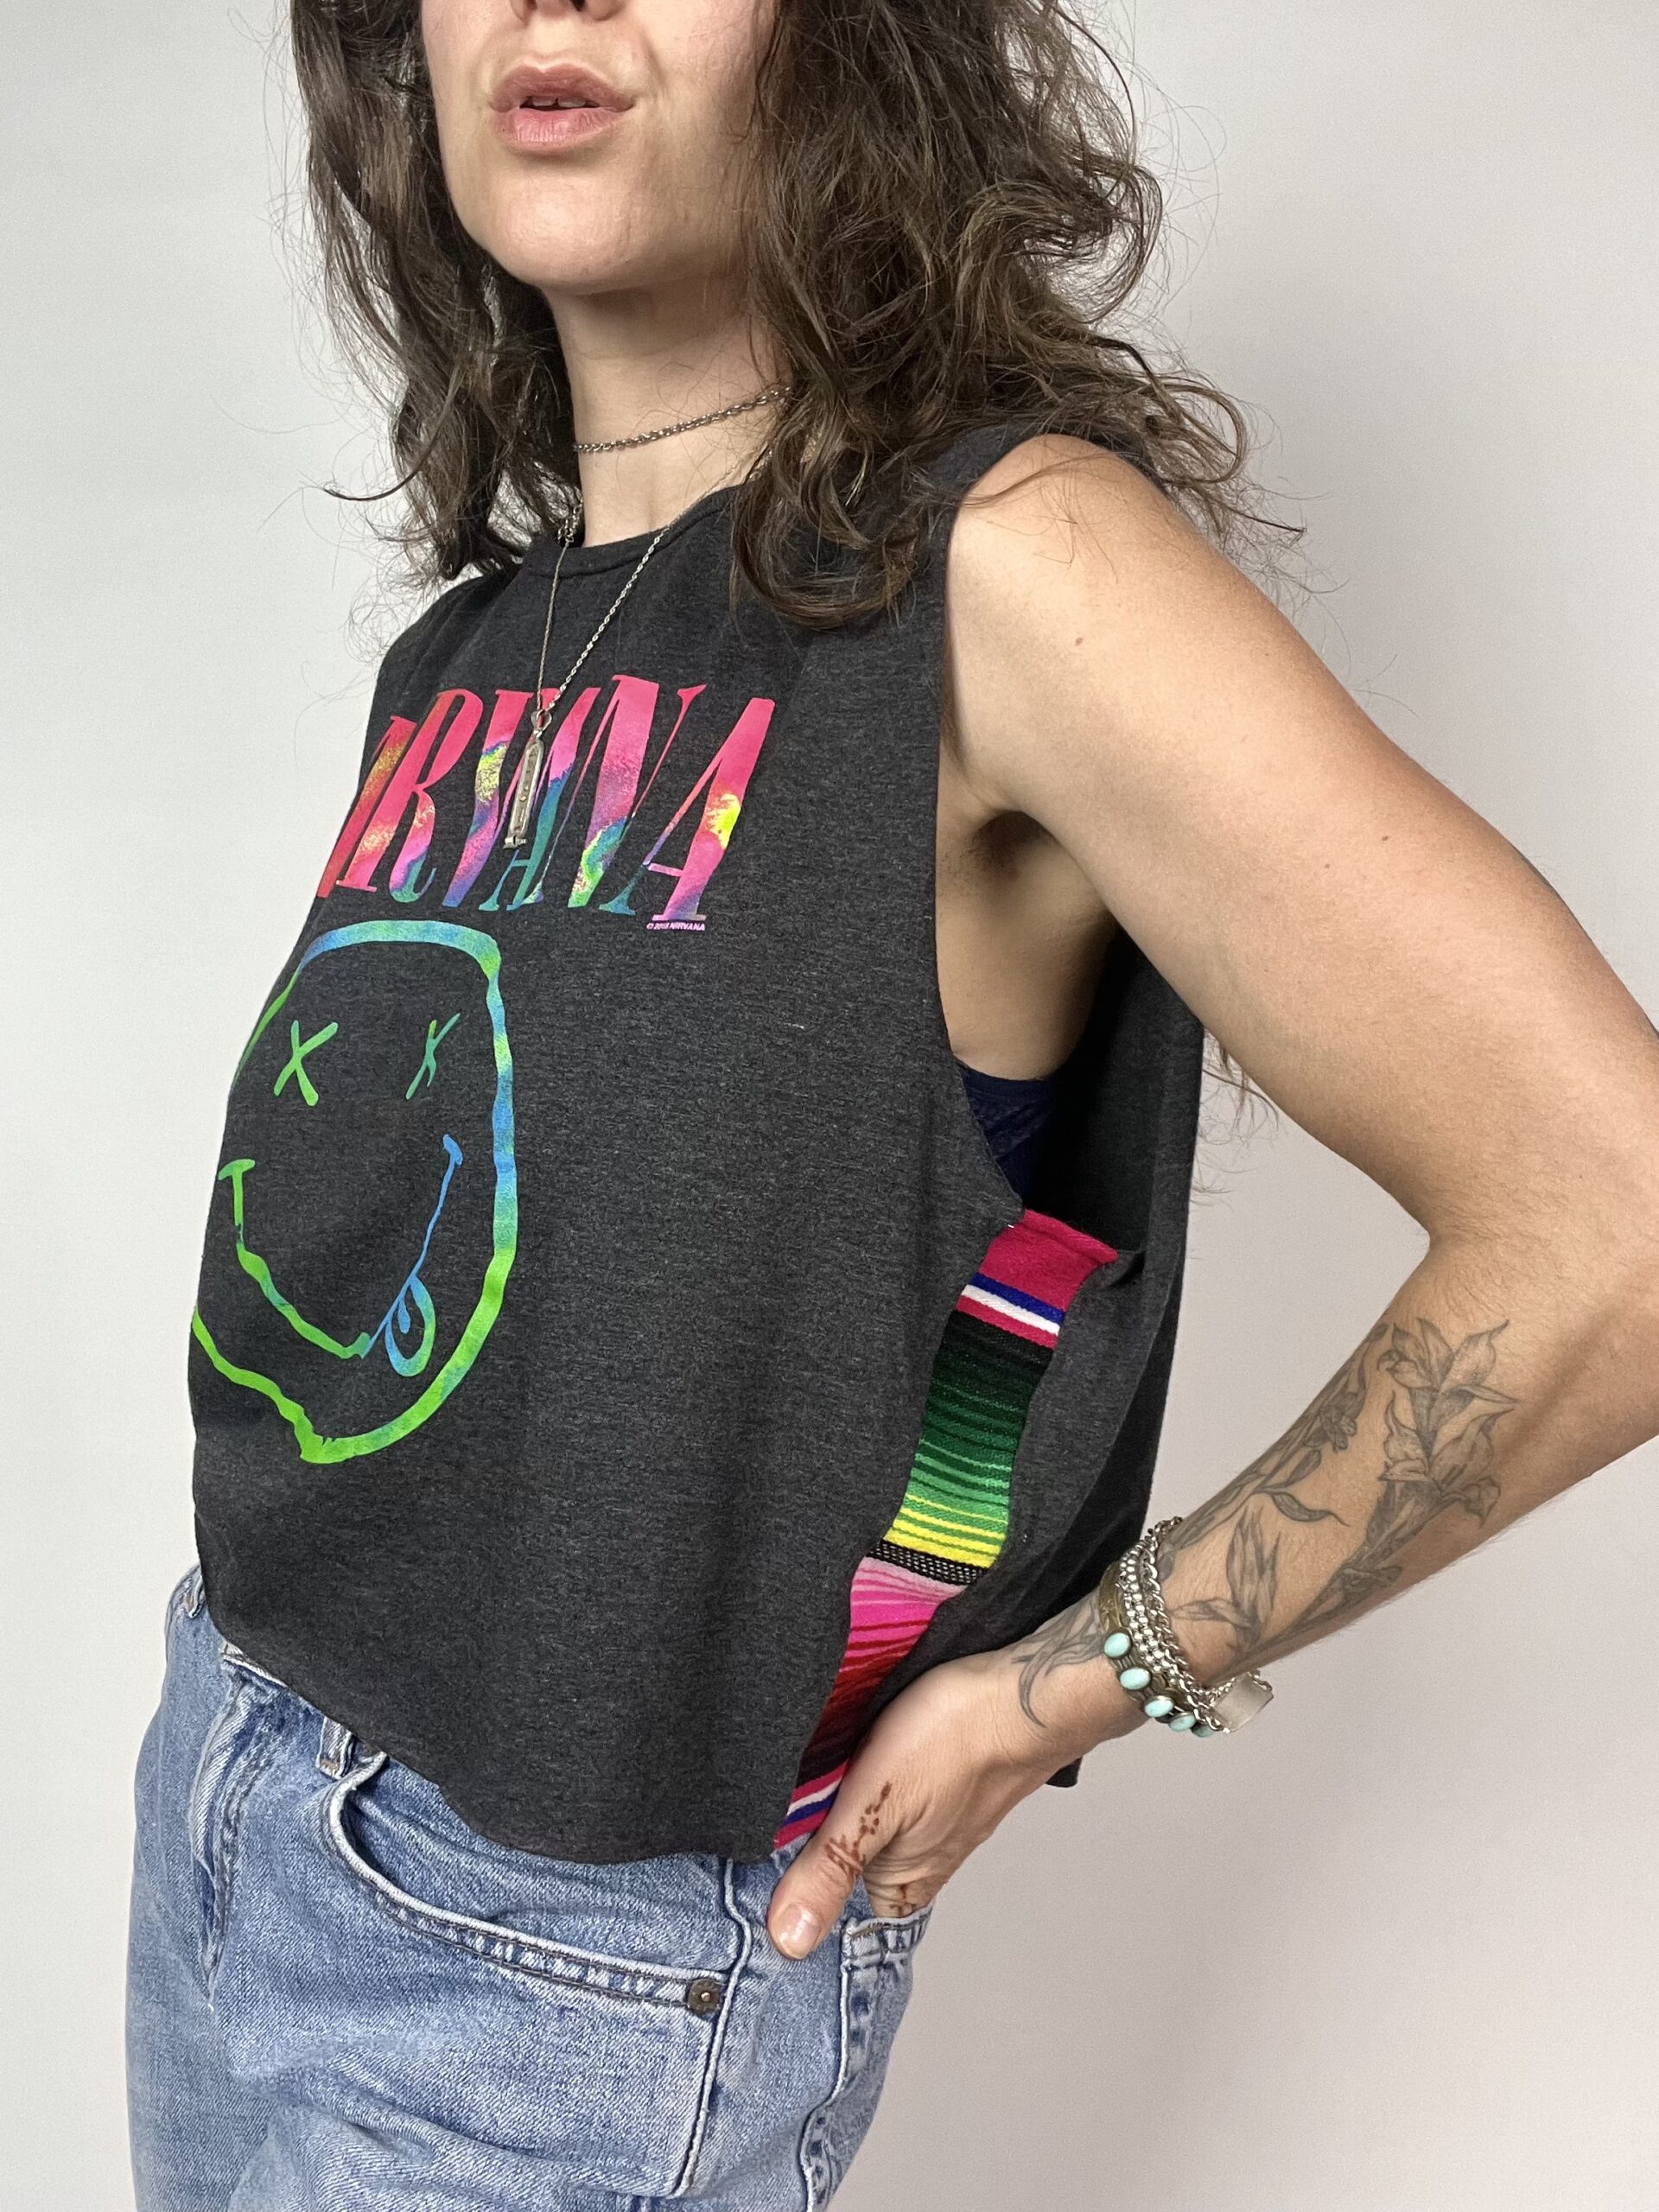 a woman wearing a tank top and jeans.